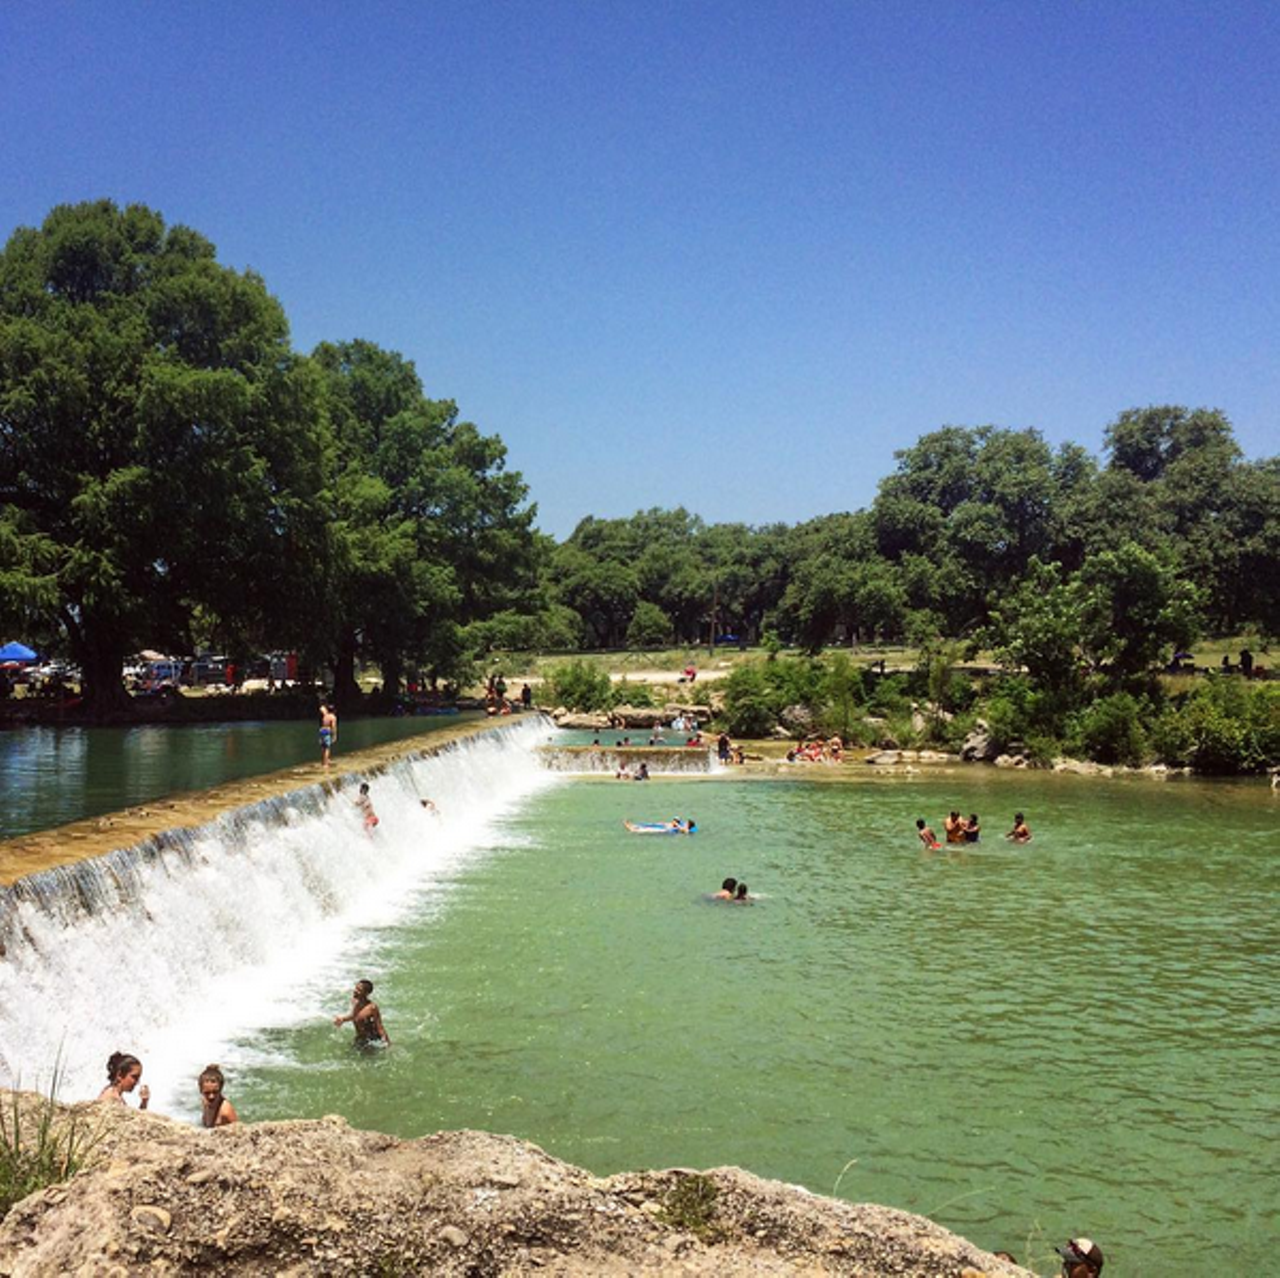 Blanco State Park
101 Park Road 23, Blanco, TXThis is another swimming stop less than an hour away from San Antonio. The park also allows camping, so there's no need to cut your day short to drive home. 
Instagram/robynleonaa